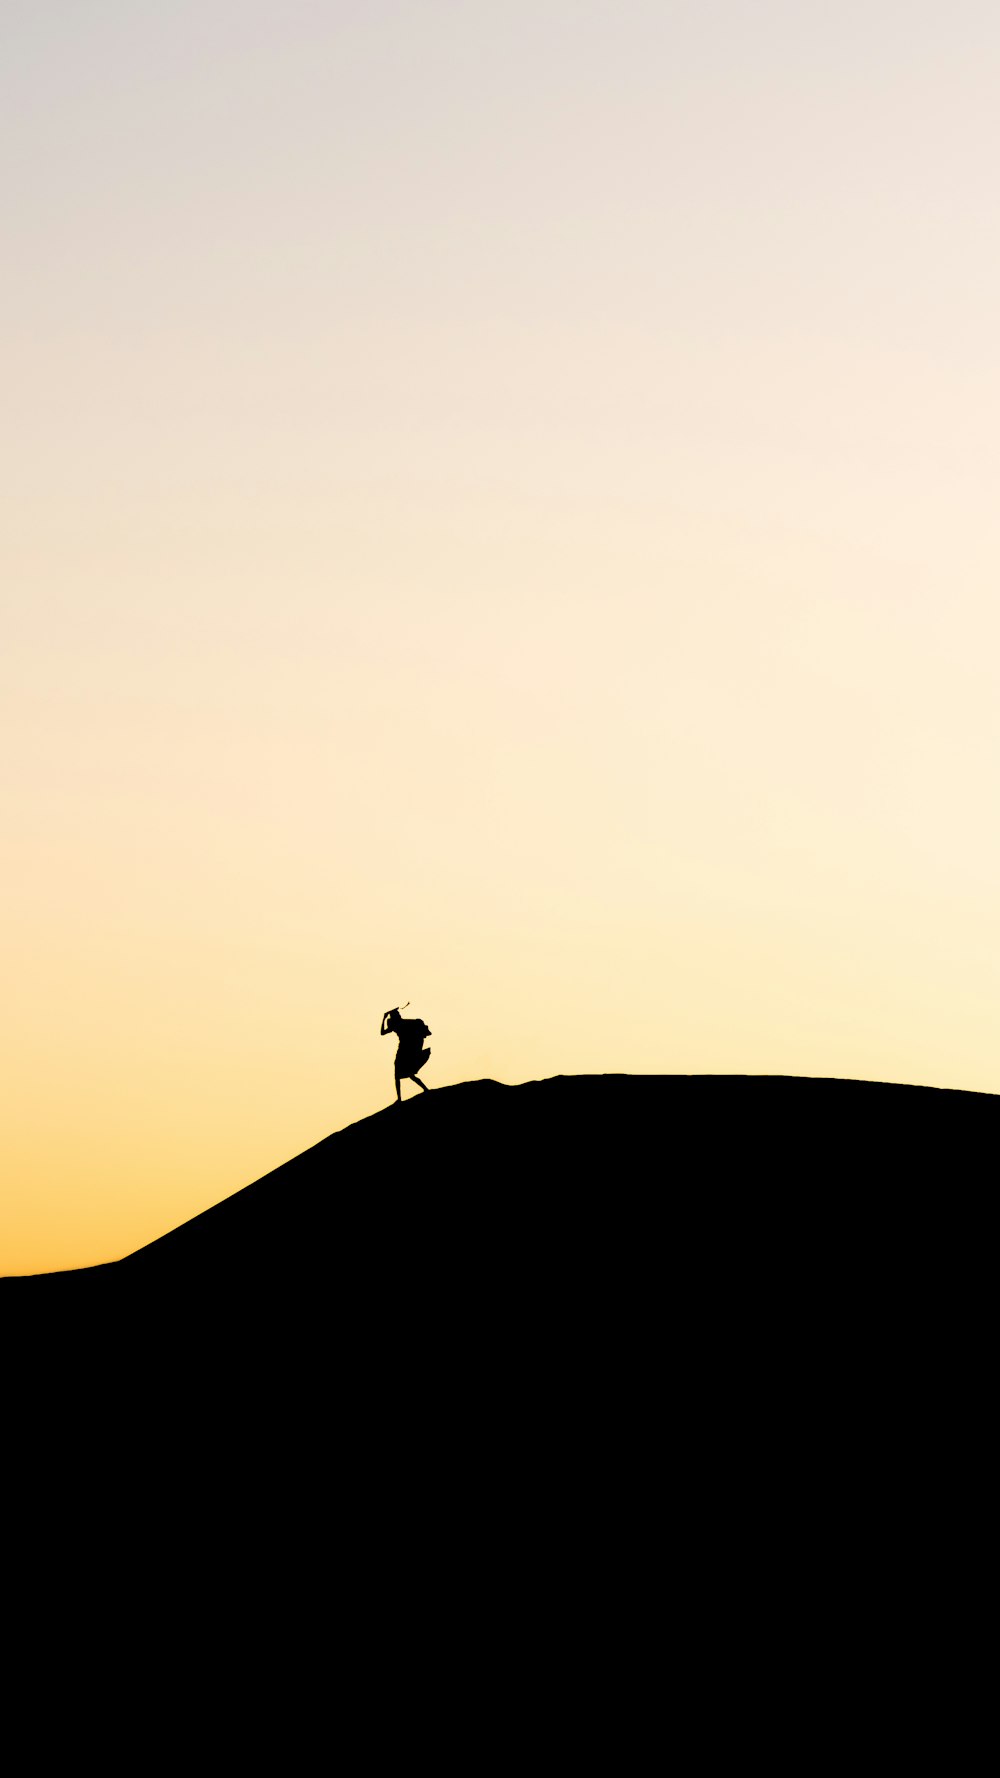 a silhouette of a person standing on top of a hill